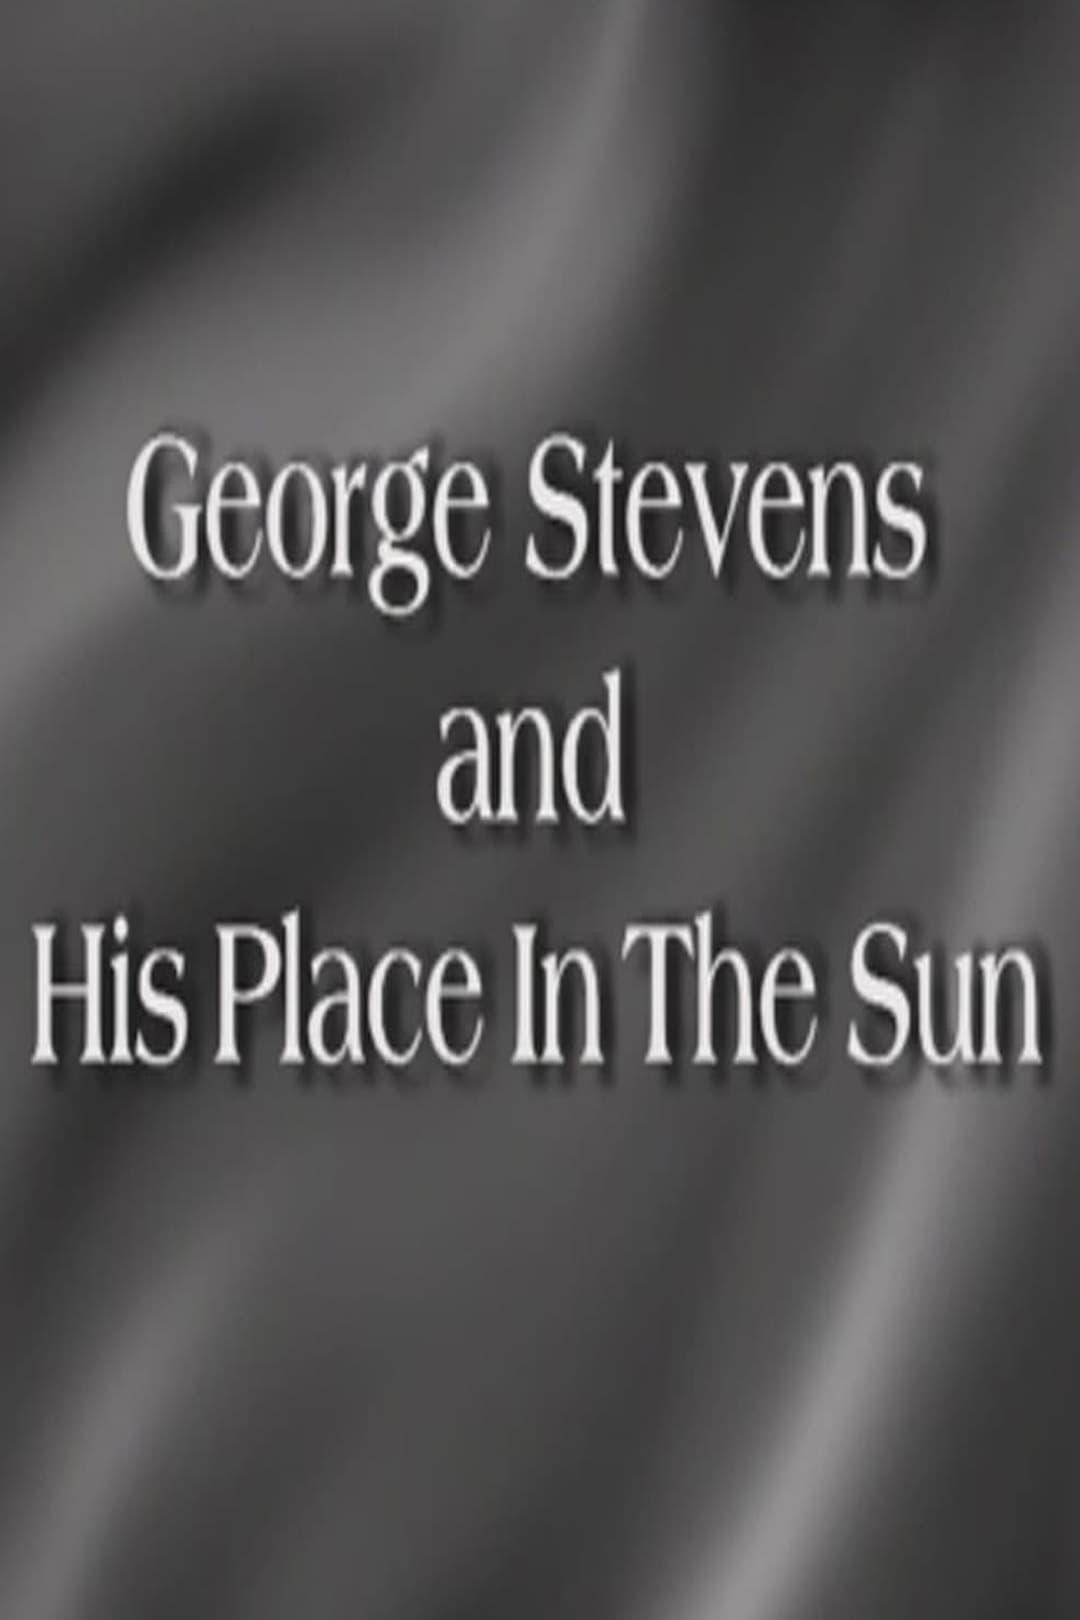 George Stevens and His Place In The Sun poster